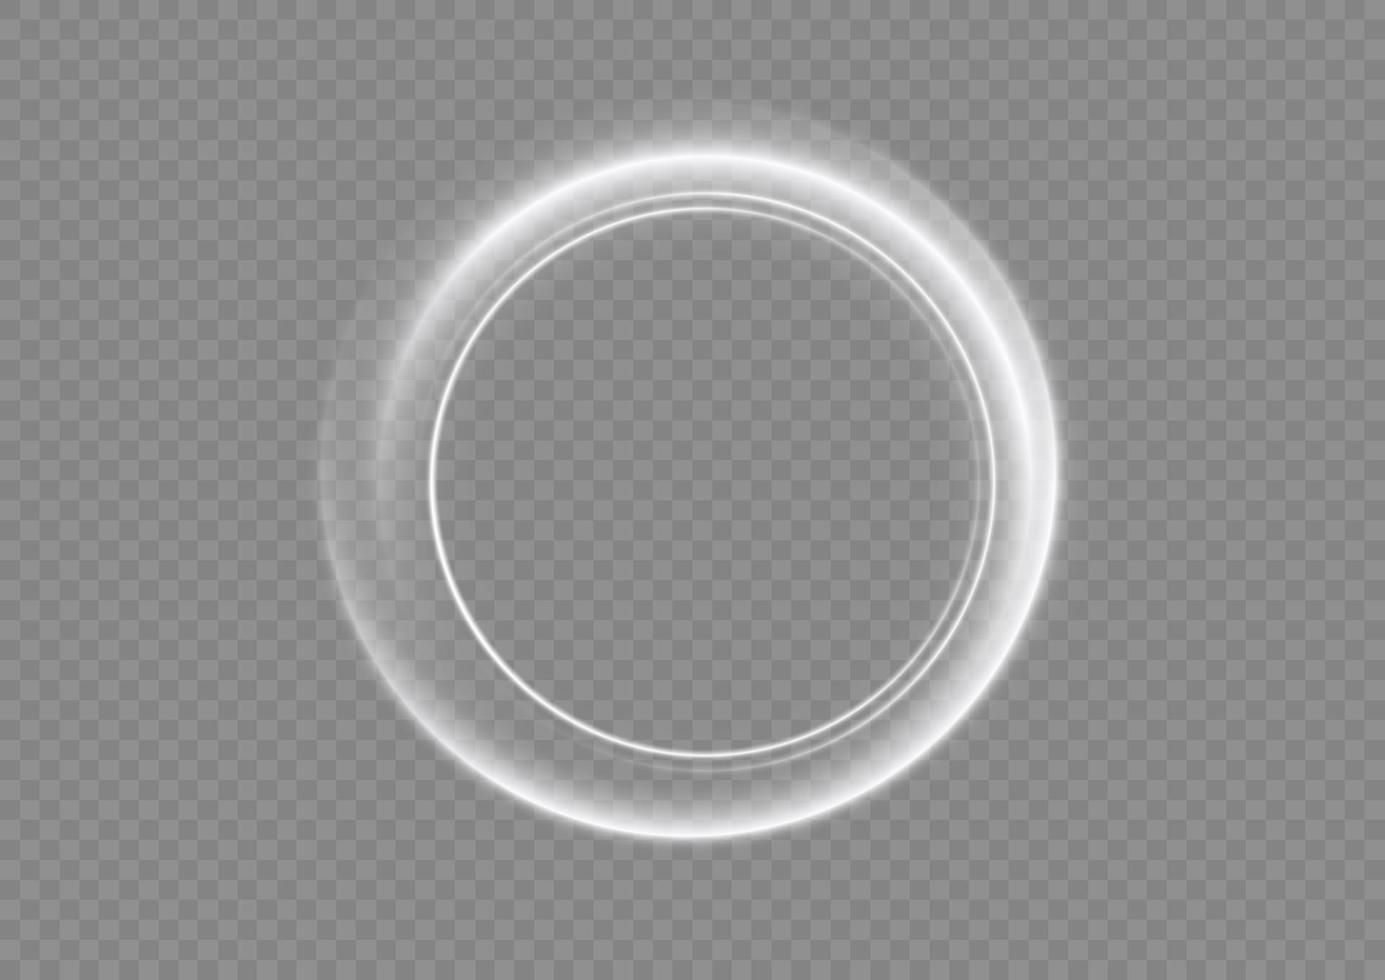 Light white Twirl. Curve light effect of white line. Abstract luxury white light vector flare semicircle and spark light effect. Luminous white circle portal. PNG Podium, platform, table.